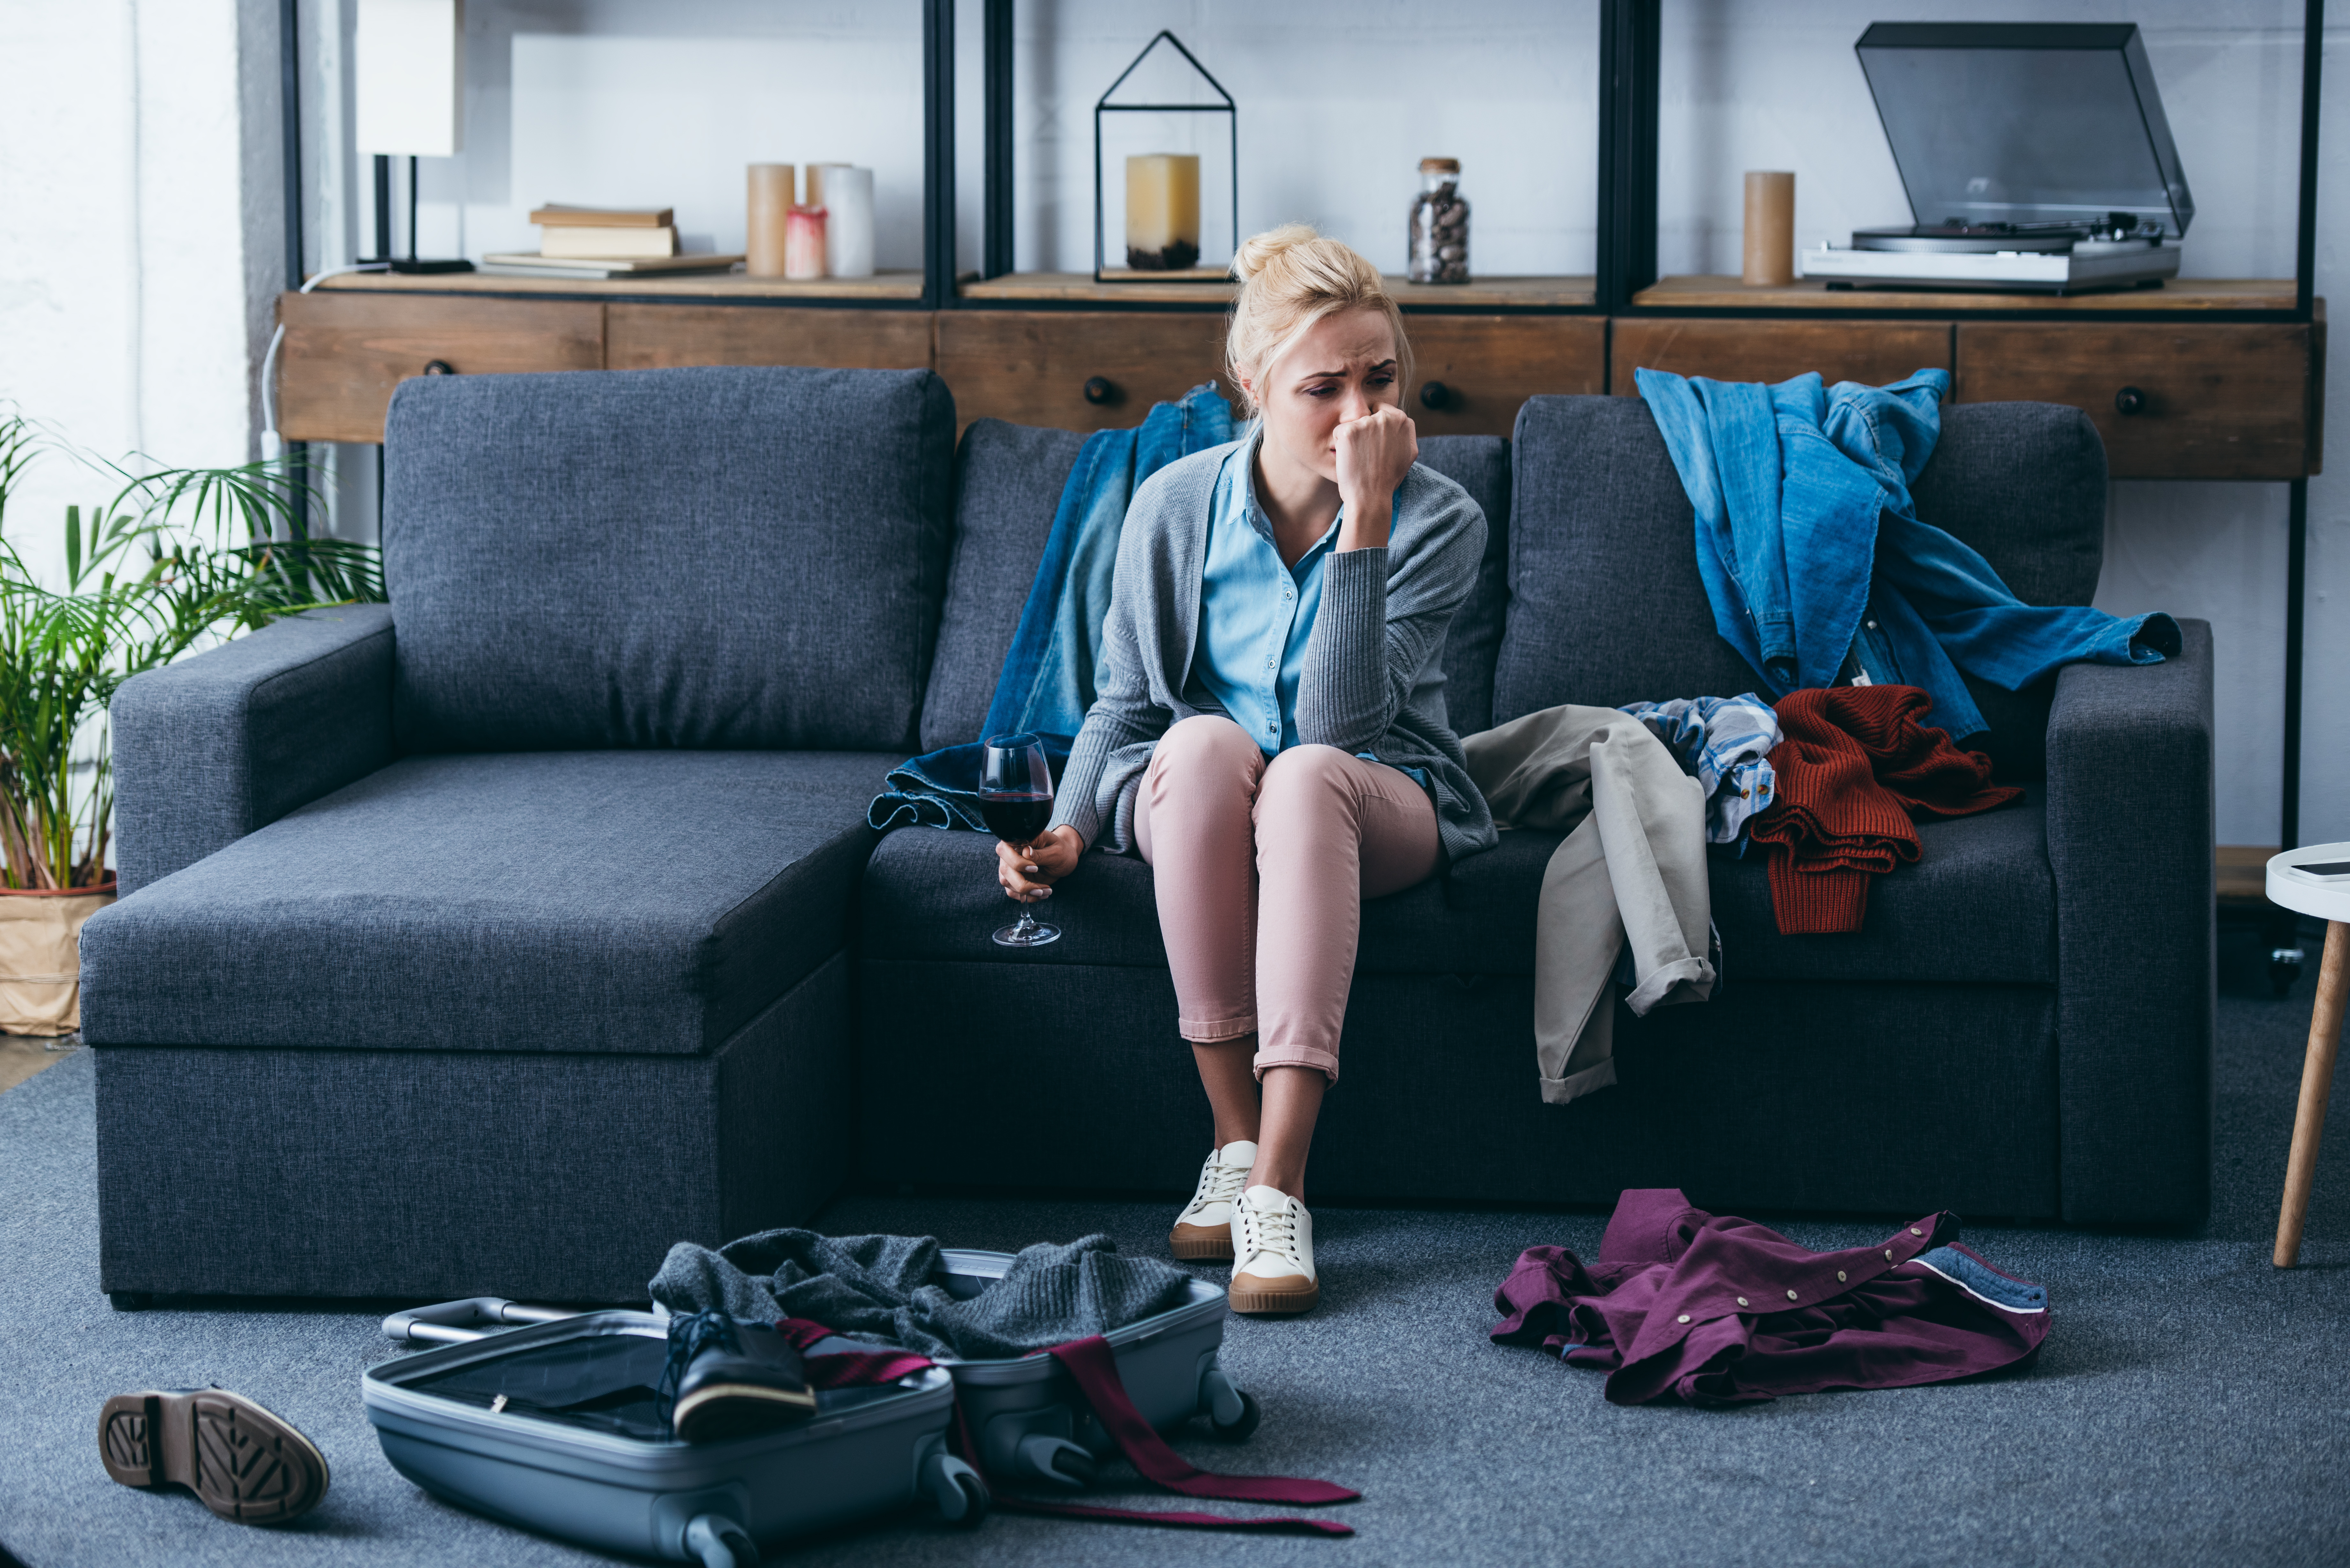 A women looking sad while packing | Source: Shutterstock